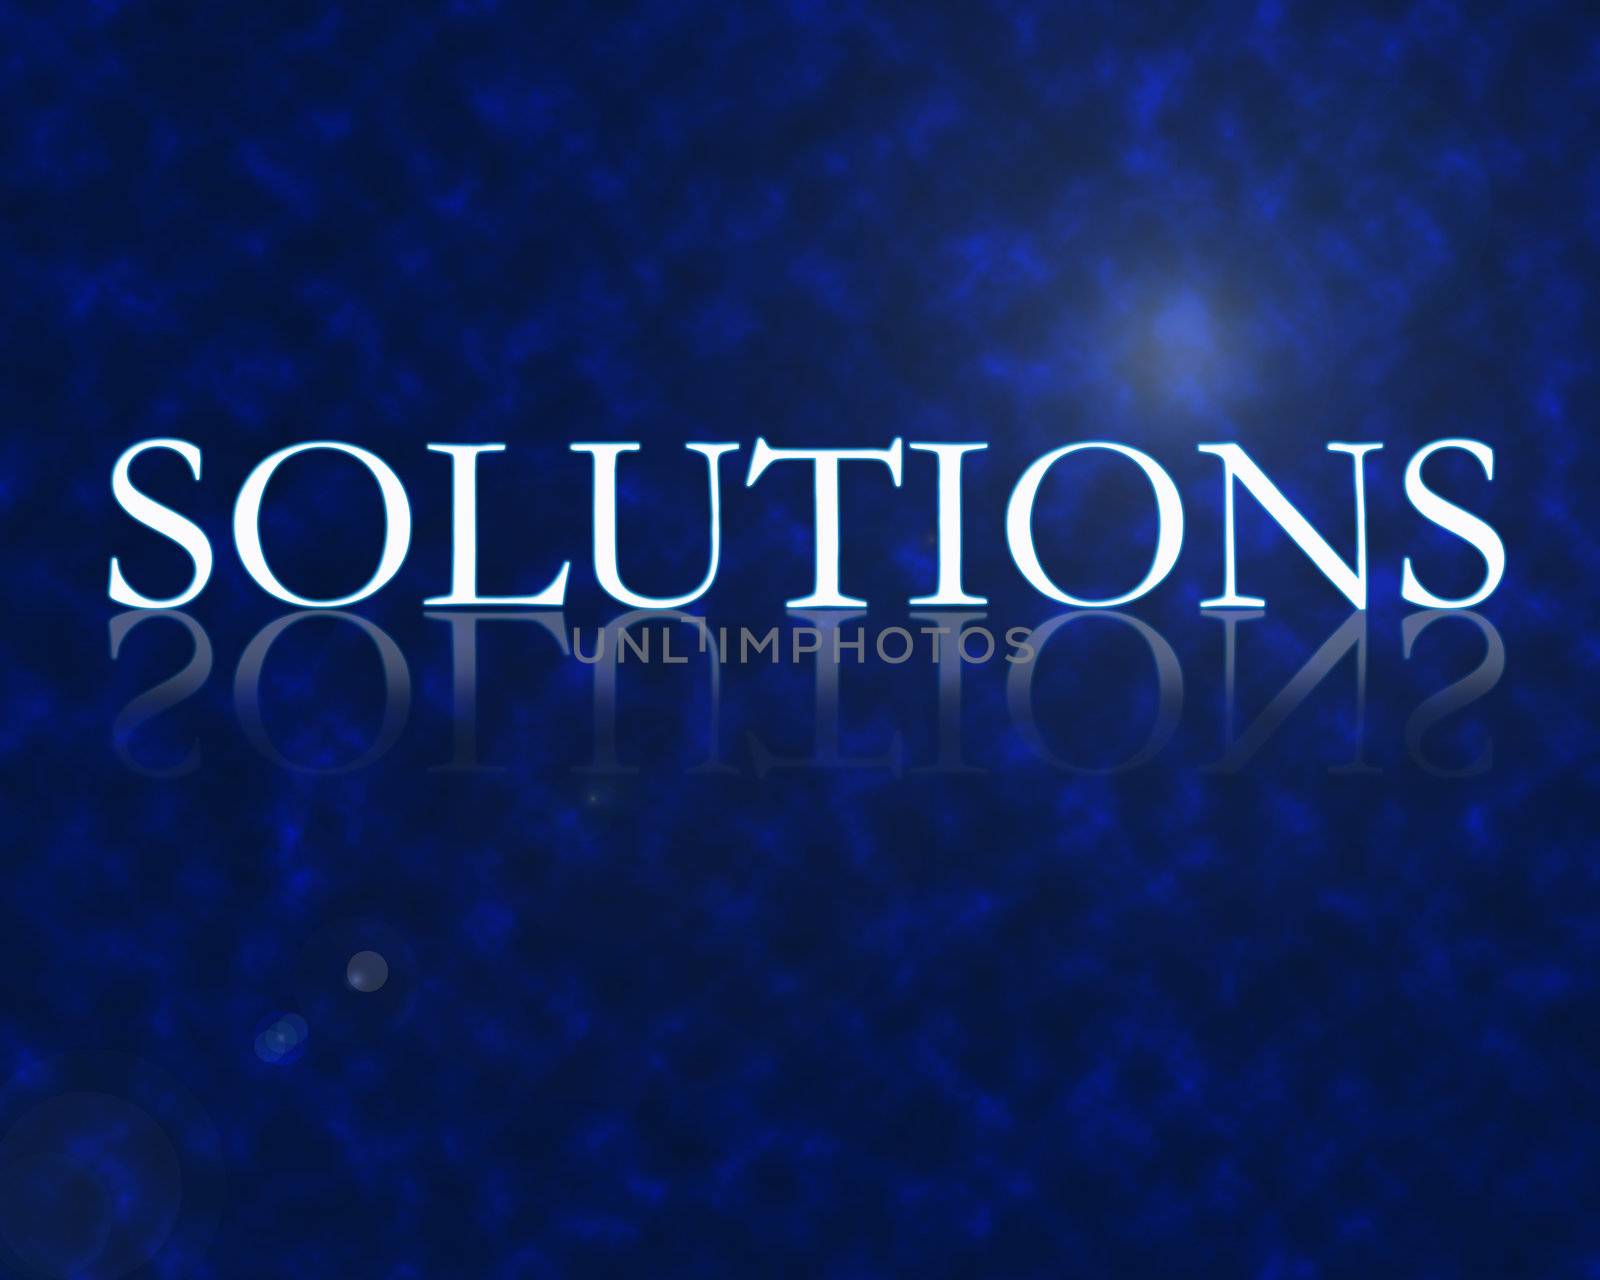 Solutions 3d with reflection high resolution digital